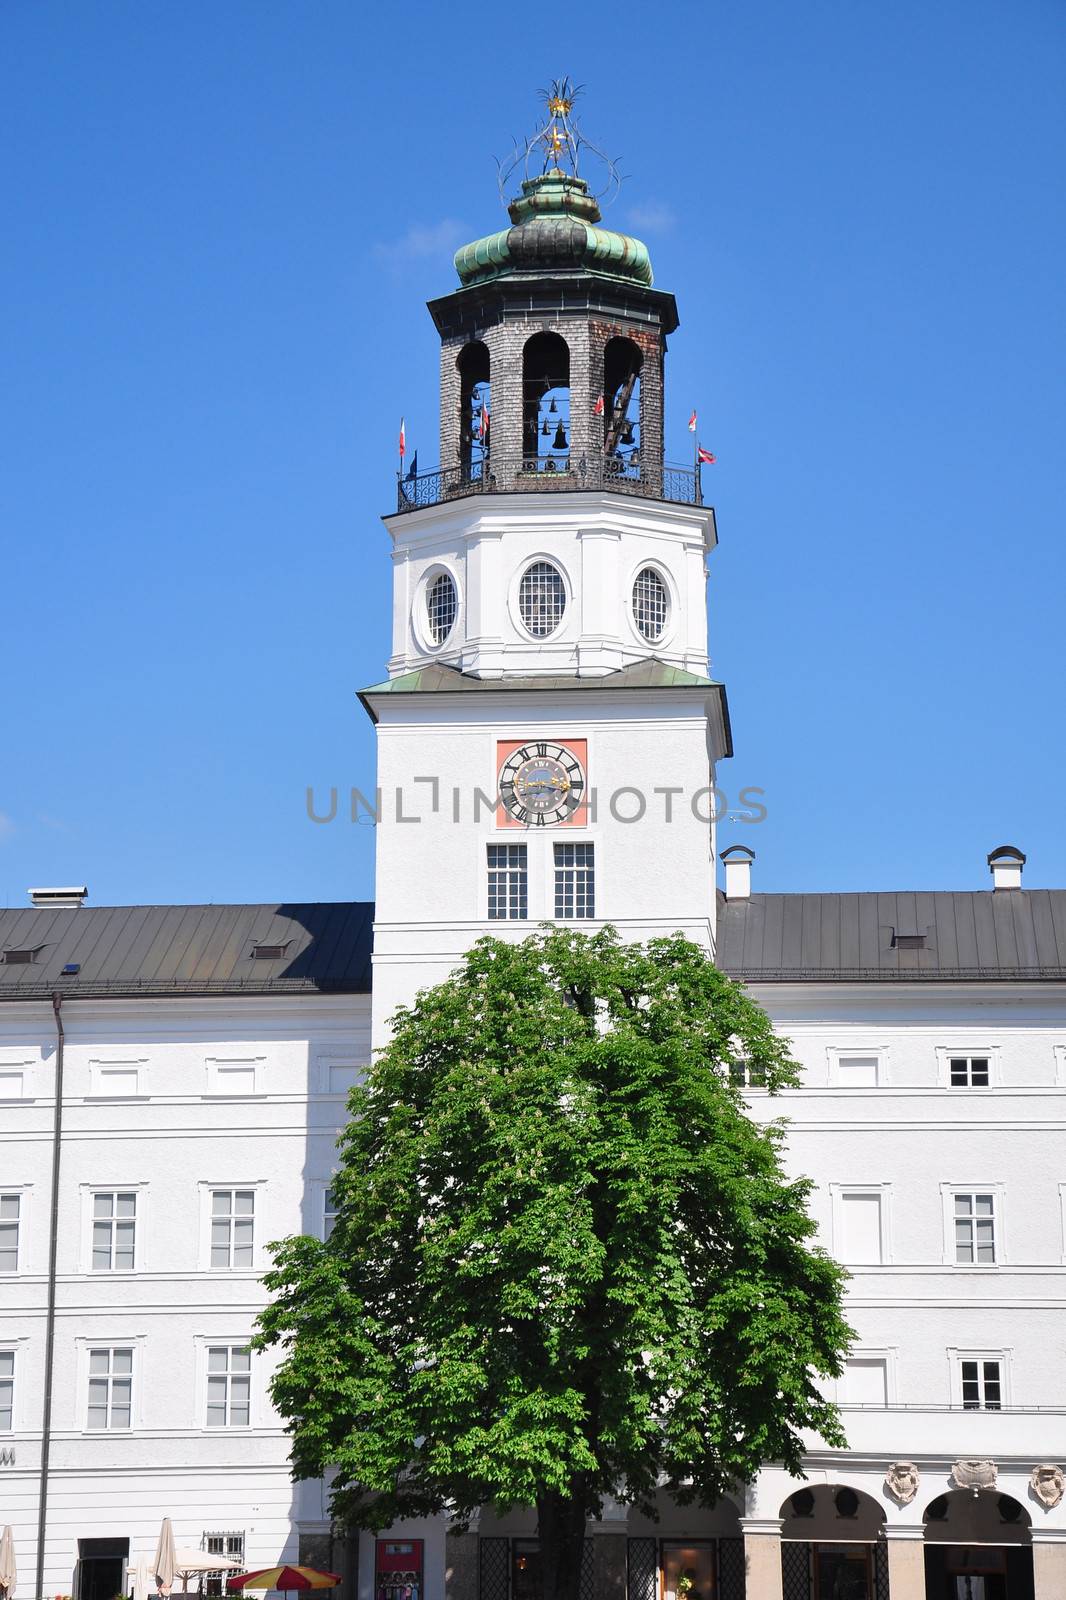 Carillon tower of New Residence in Salzburg